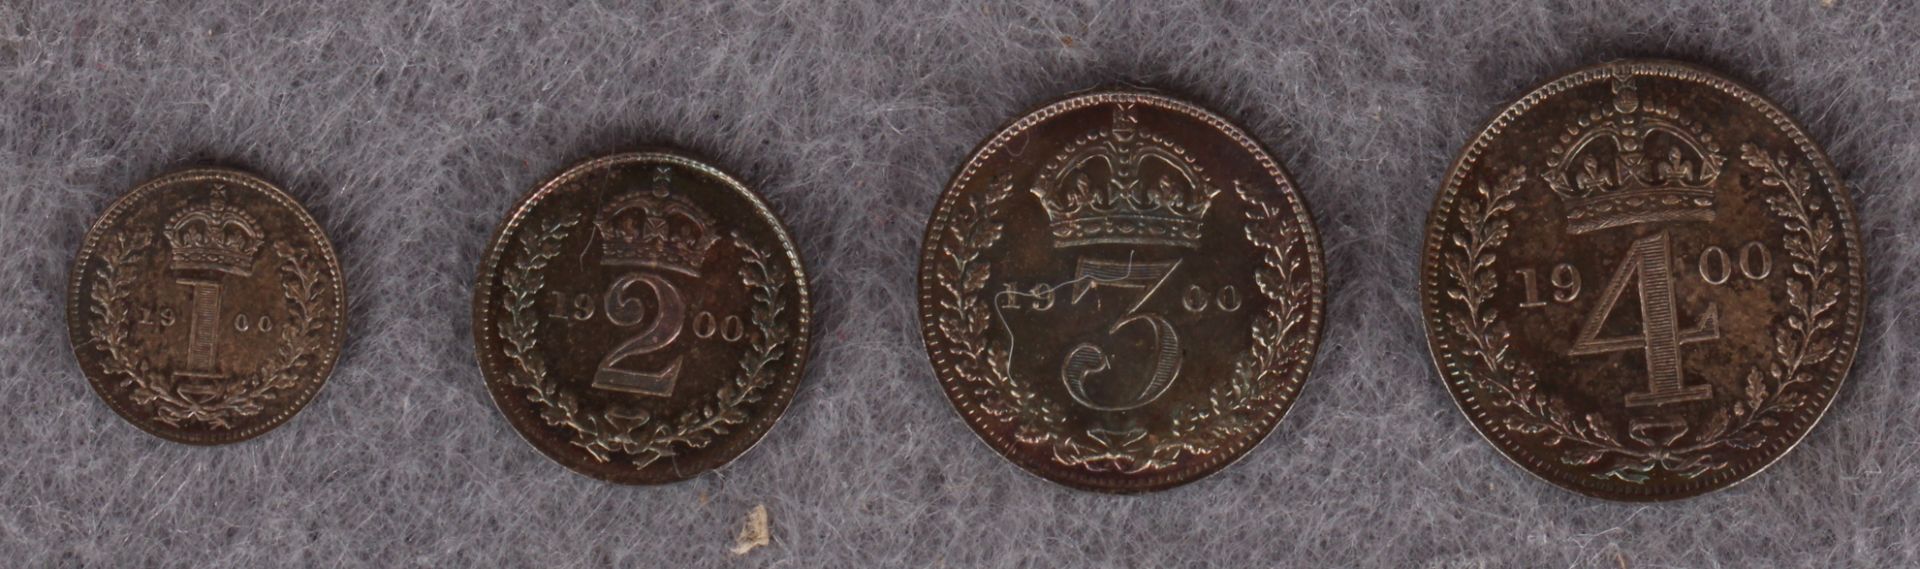 Maundy coin set 1900,